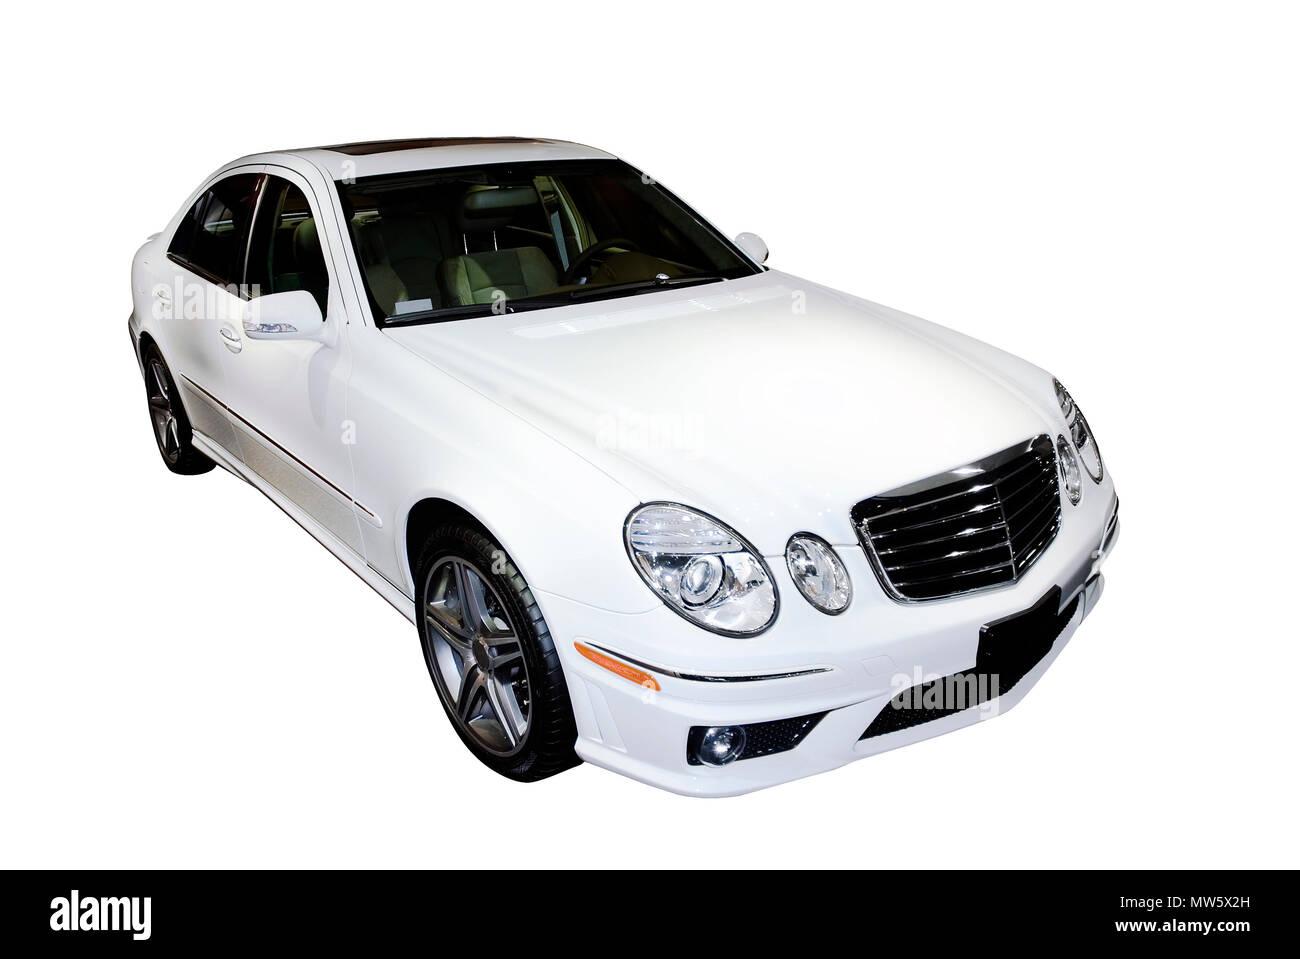 Beautiful Mercedes E Class Luxury Car Isolated On A White